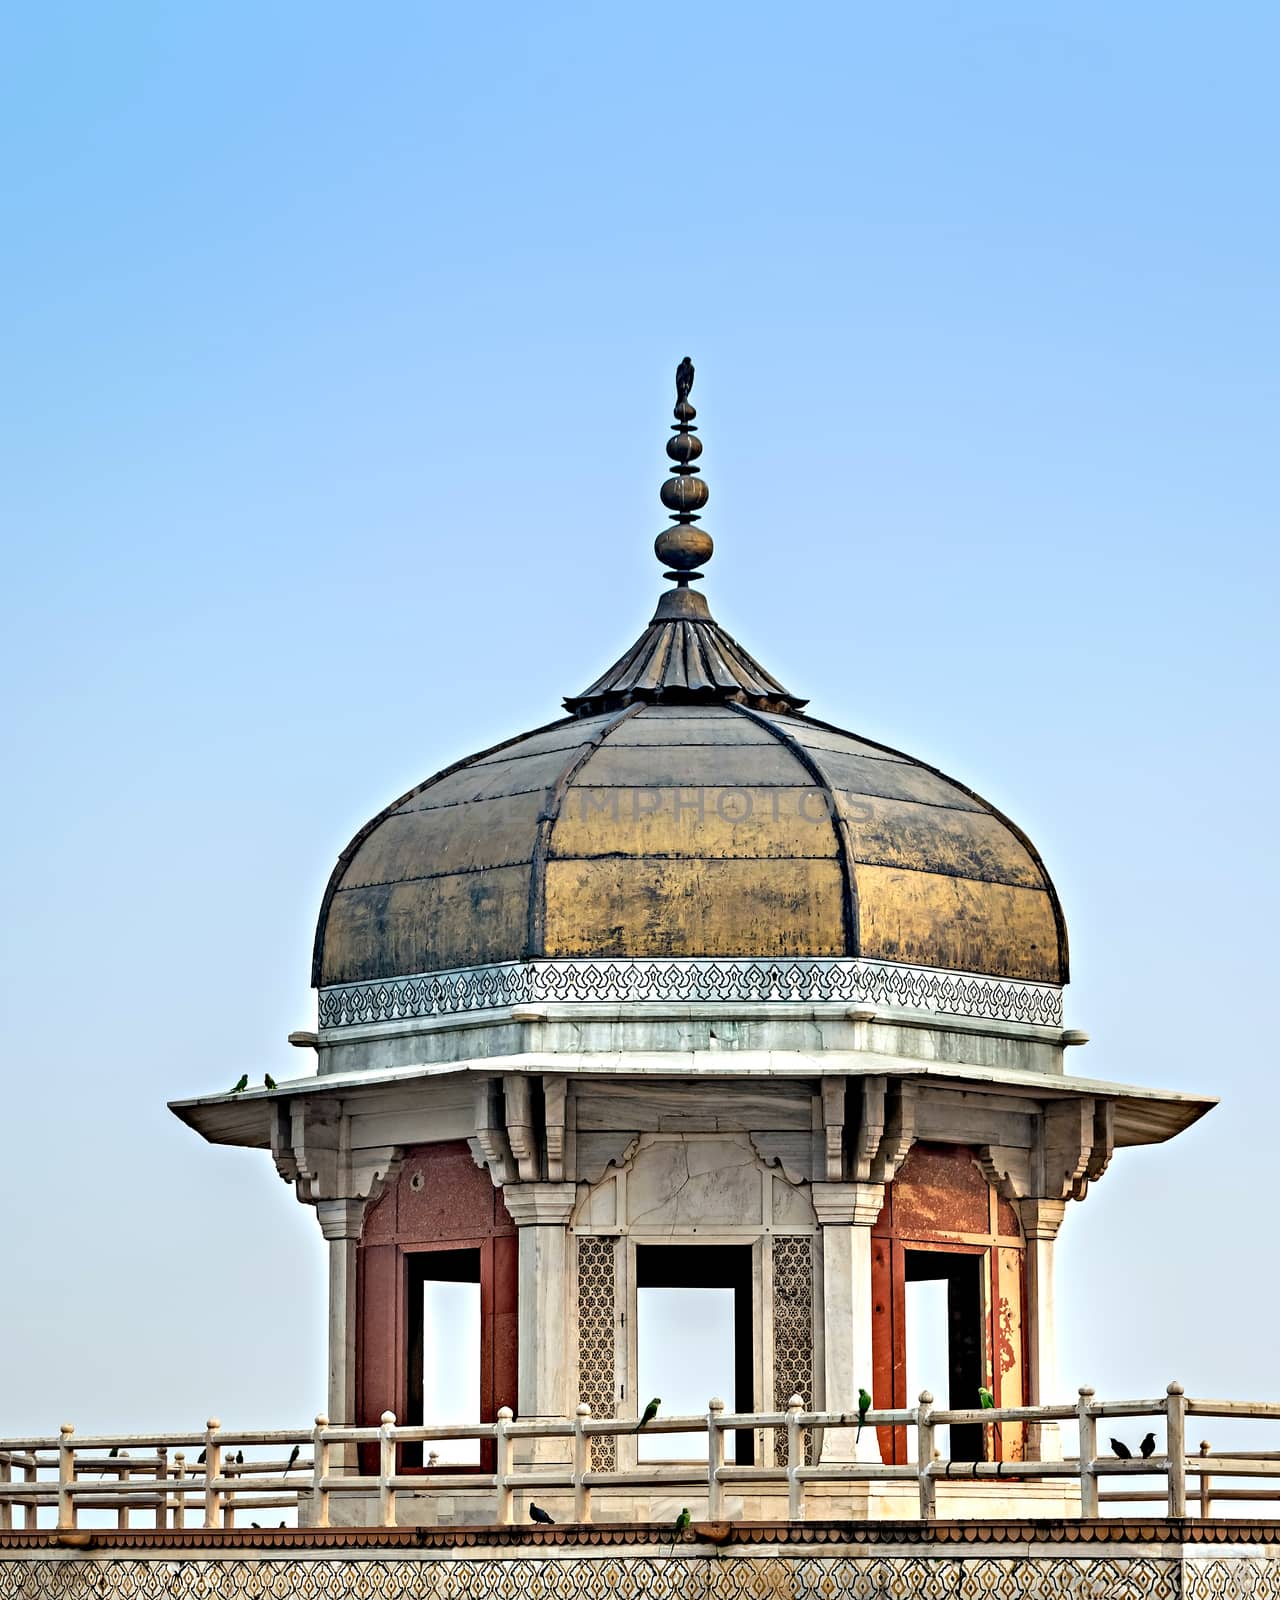 One of the tower domes of Red Fort in Agra, Uttar Pradesh, India. by lalam